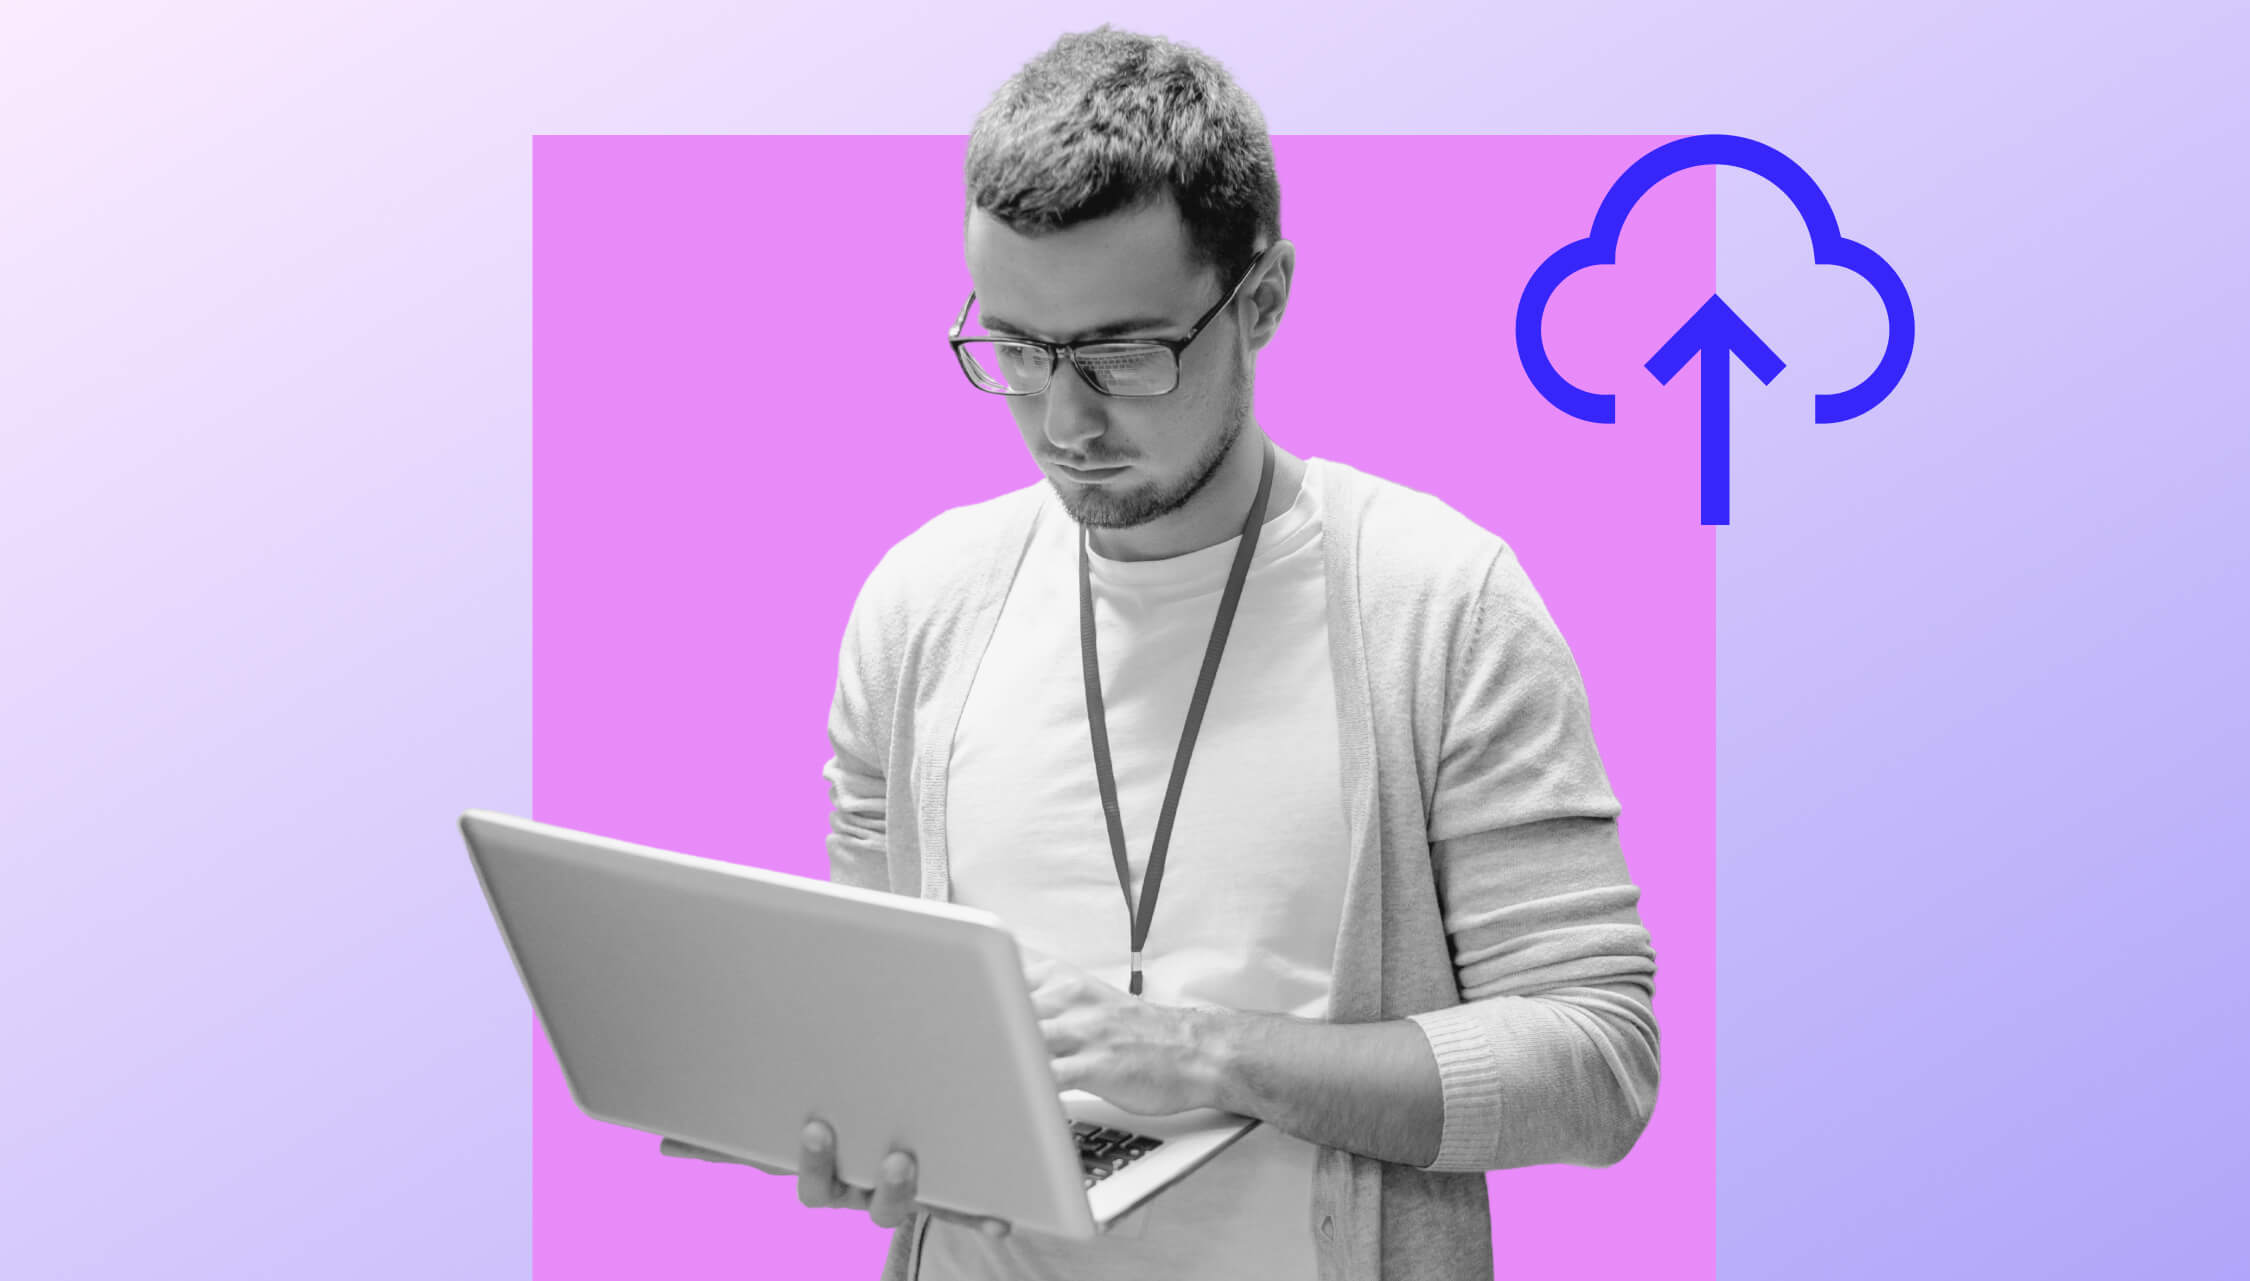 Man with glasses looks intently at the laptop in his hand, the background is purple with a blue cloud icon.